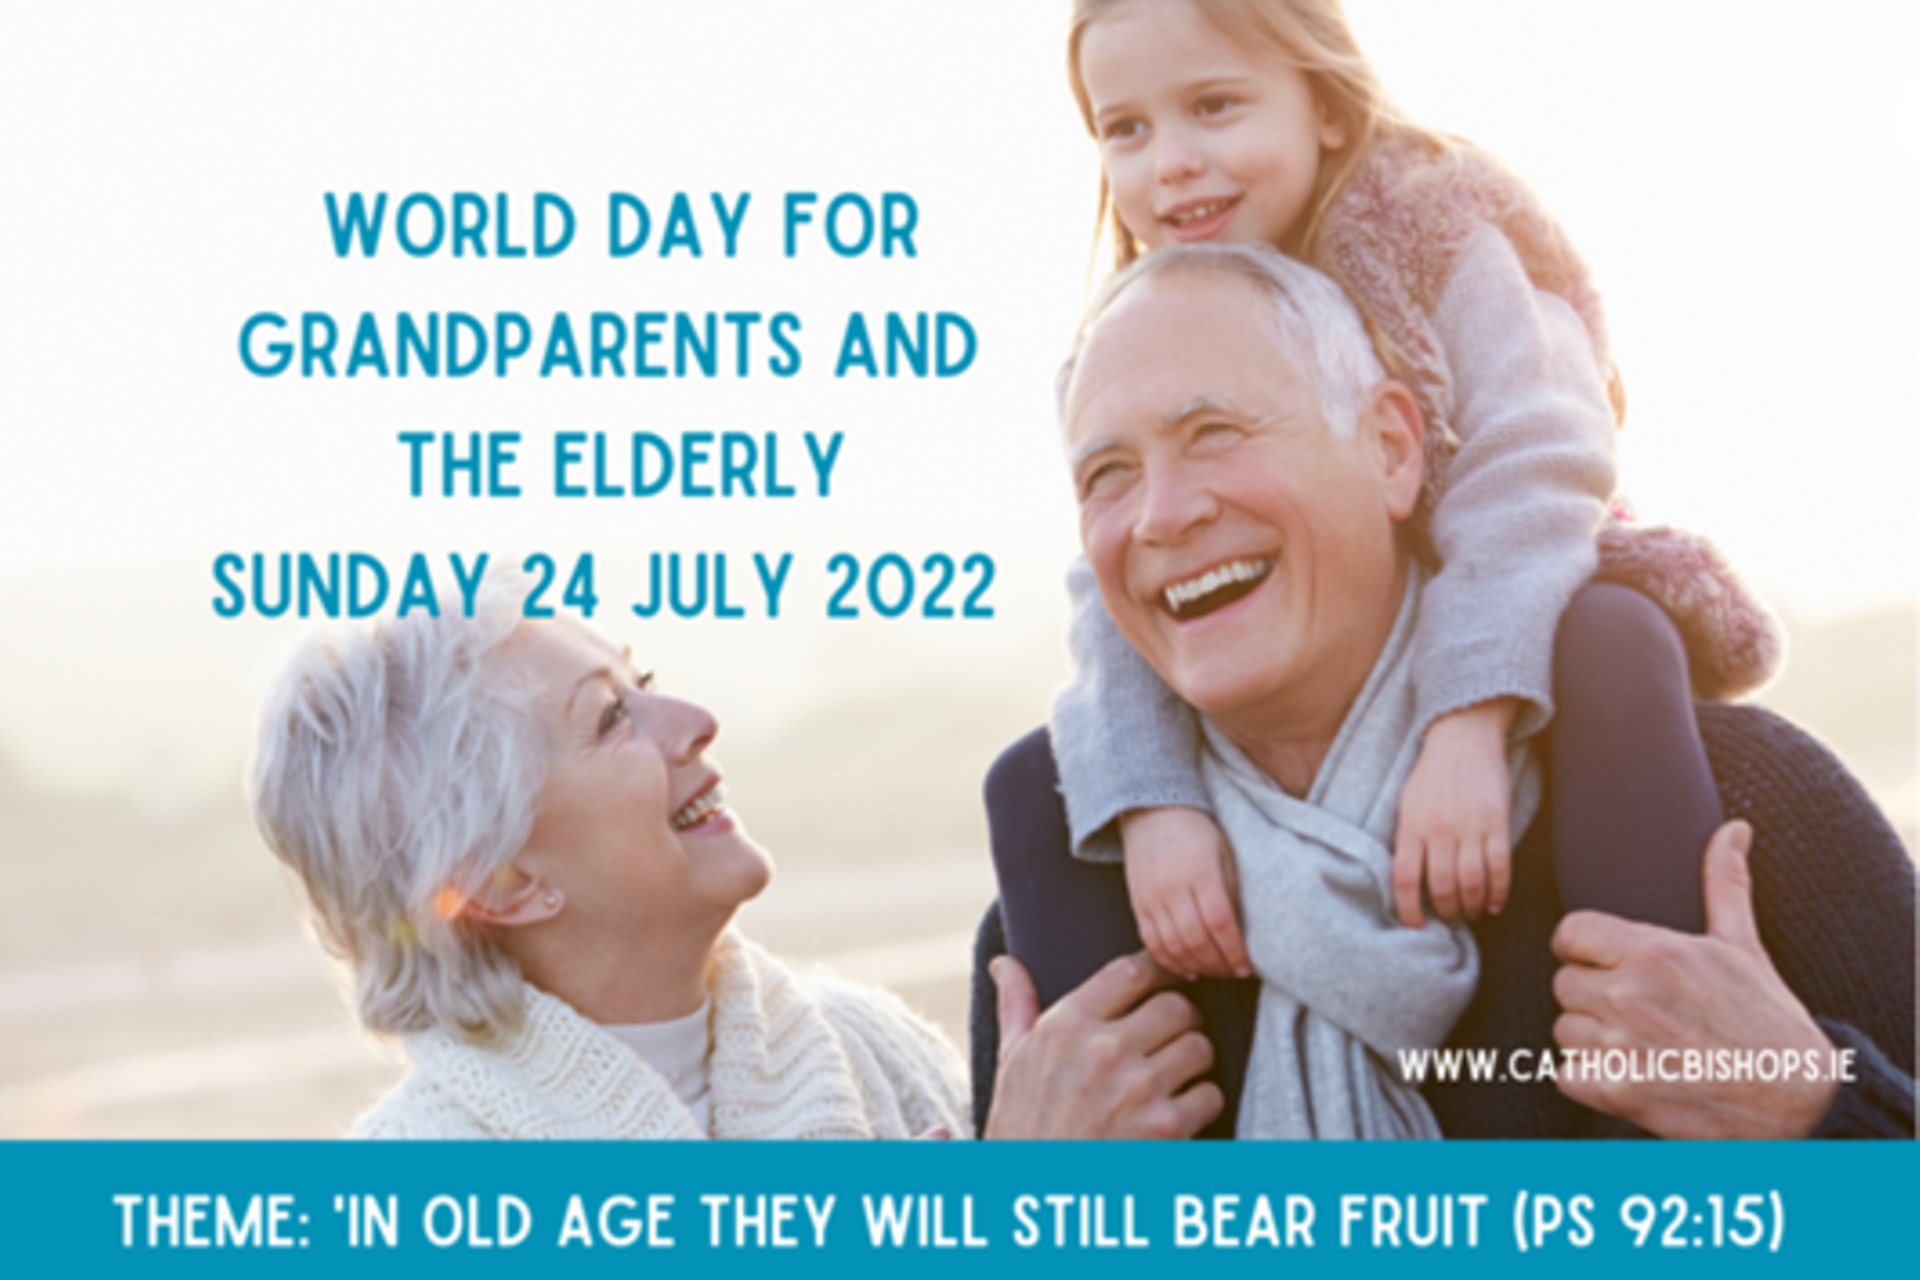 Resources for World Day for Grandparents and the Elderly 2022